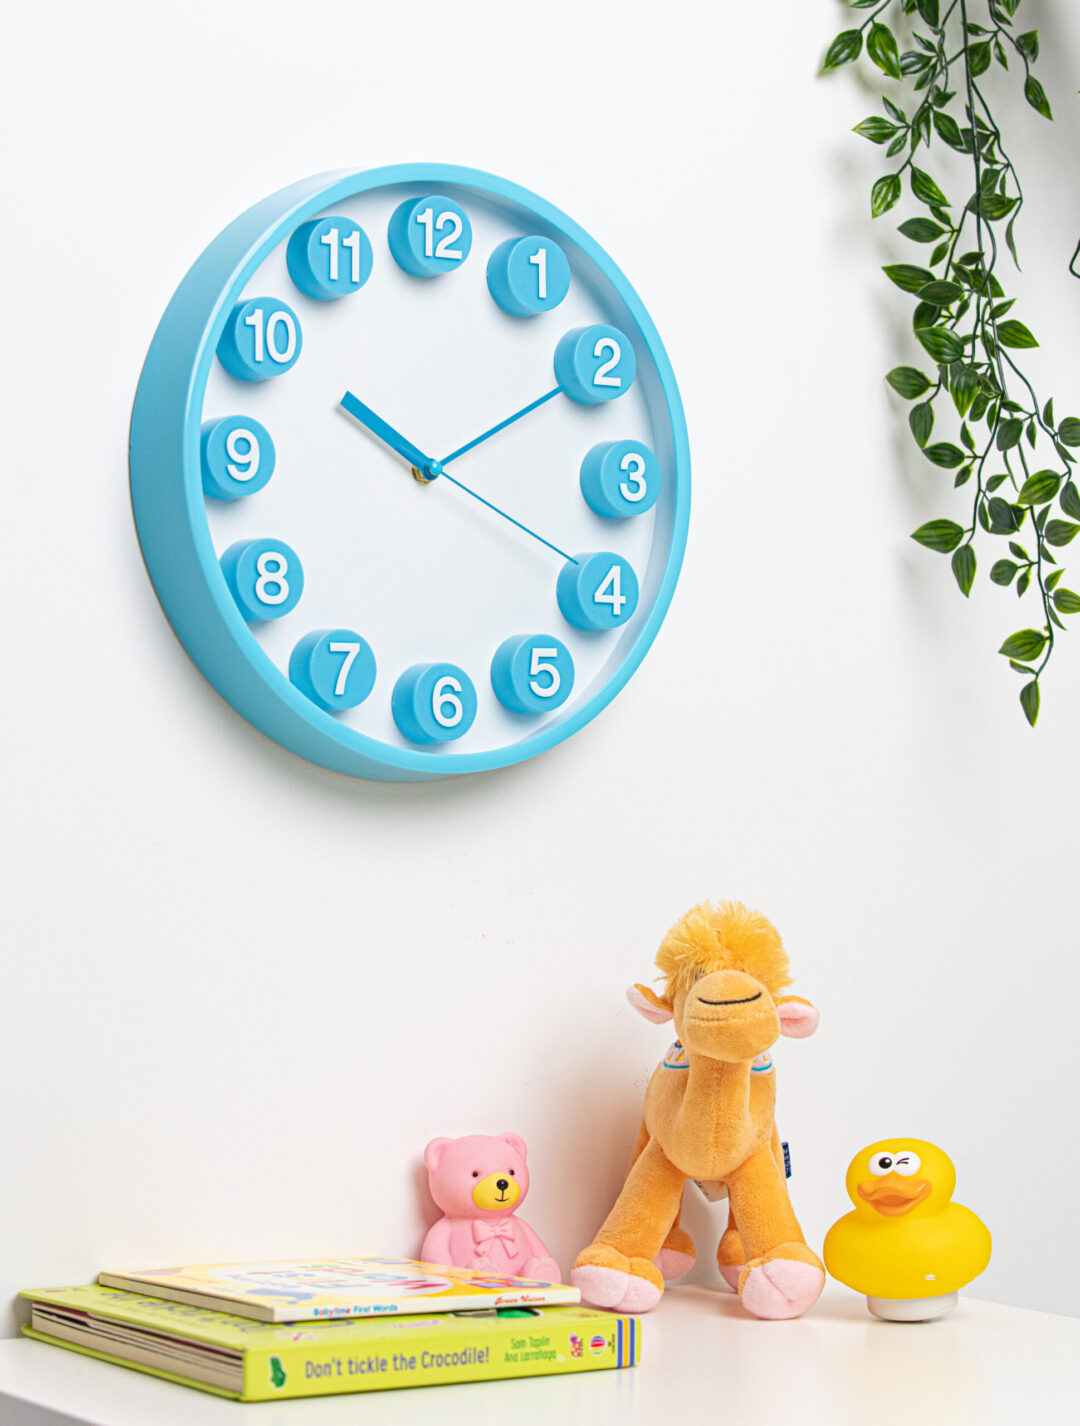 five minute friday} Tick Tock: A Chalk Wall Clock - Blue i Style